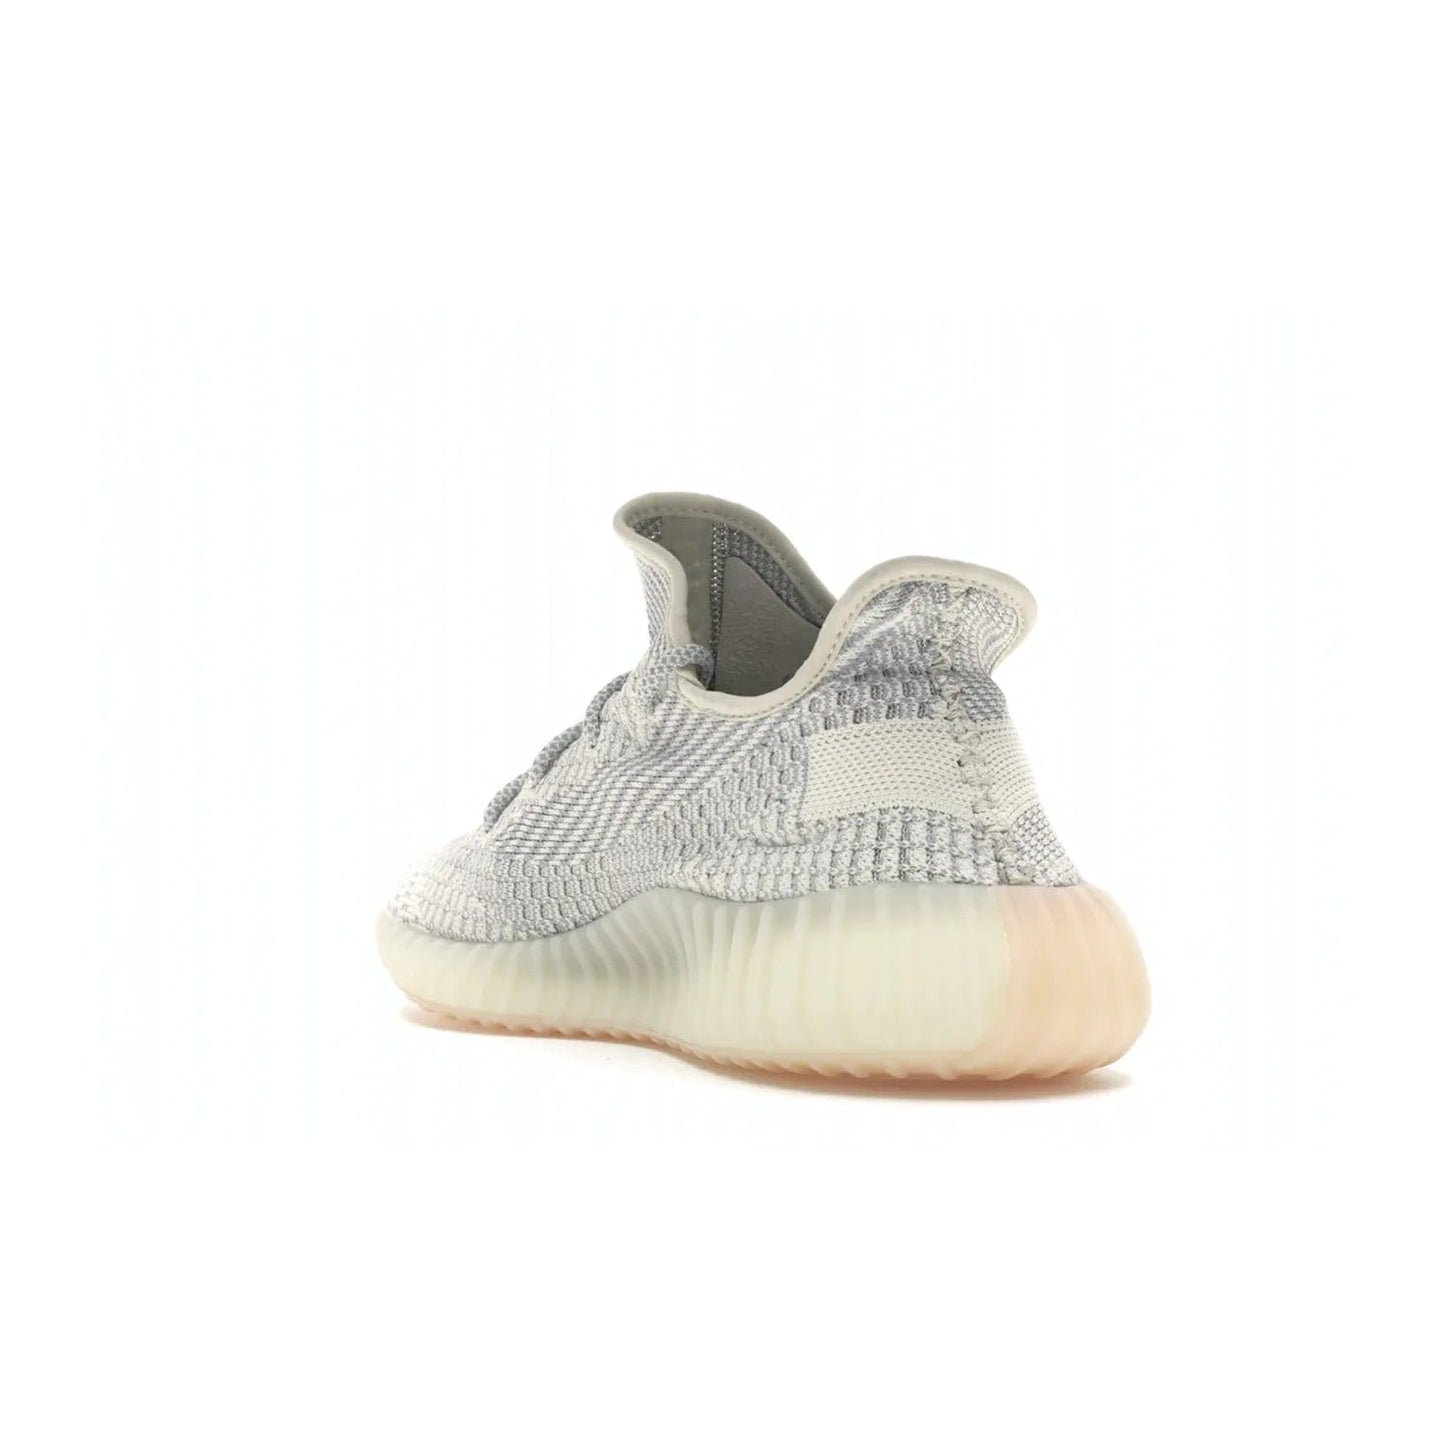 adidas Yeezy Boost 350 V2 Lundmark (Non Reflective) - Image 25 - Only at www.BallersClubKickz.com - Shop the exclusive adidas Yeezy Boost 350 V2 Lundmark with a subtle summer color, mesh upper, white-to-cream transitional midsole, light tan outsole, and pink middle stripe. Comfort and style come together in this perfect summer 350 V2. Released on July 11, 2019.